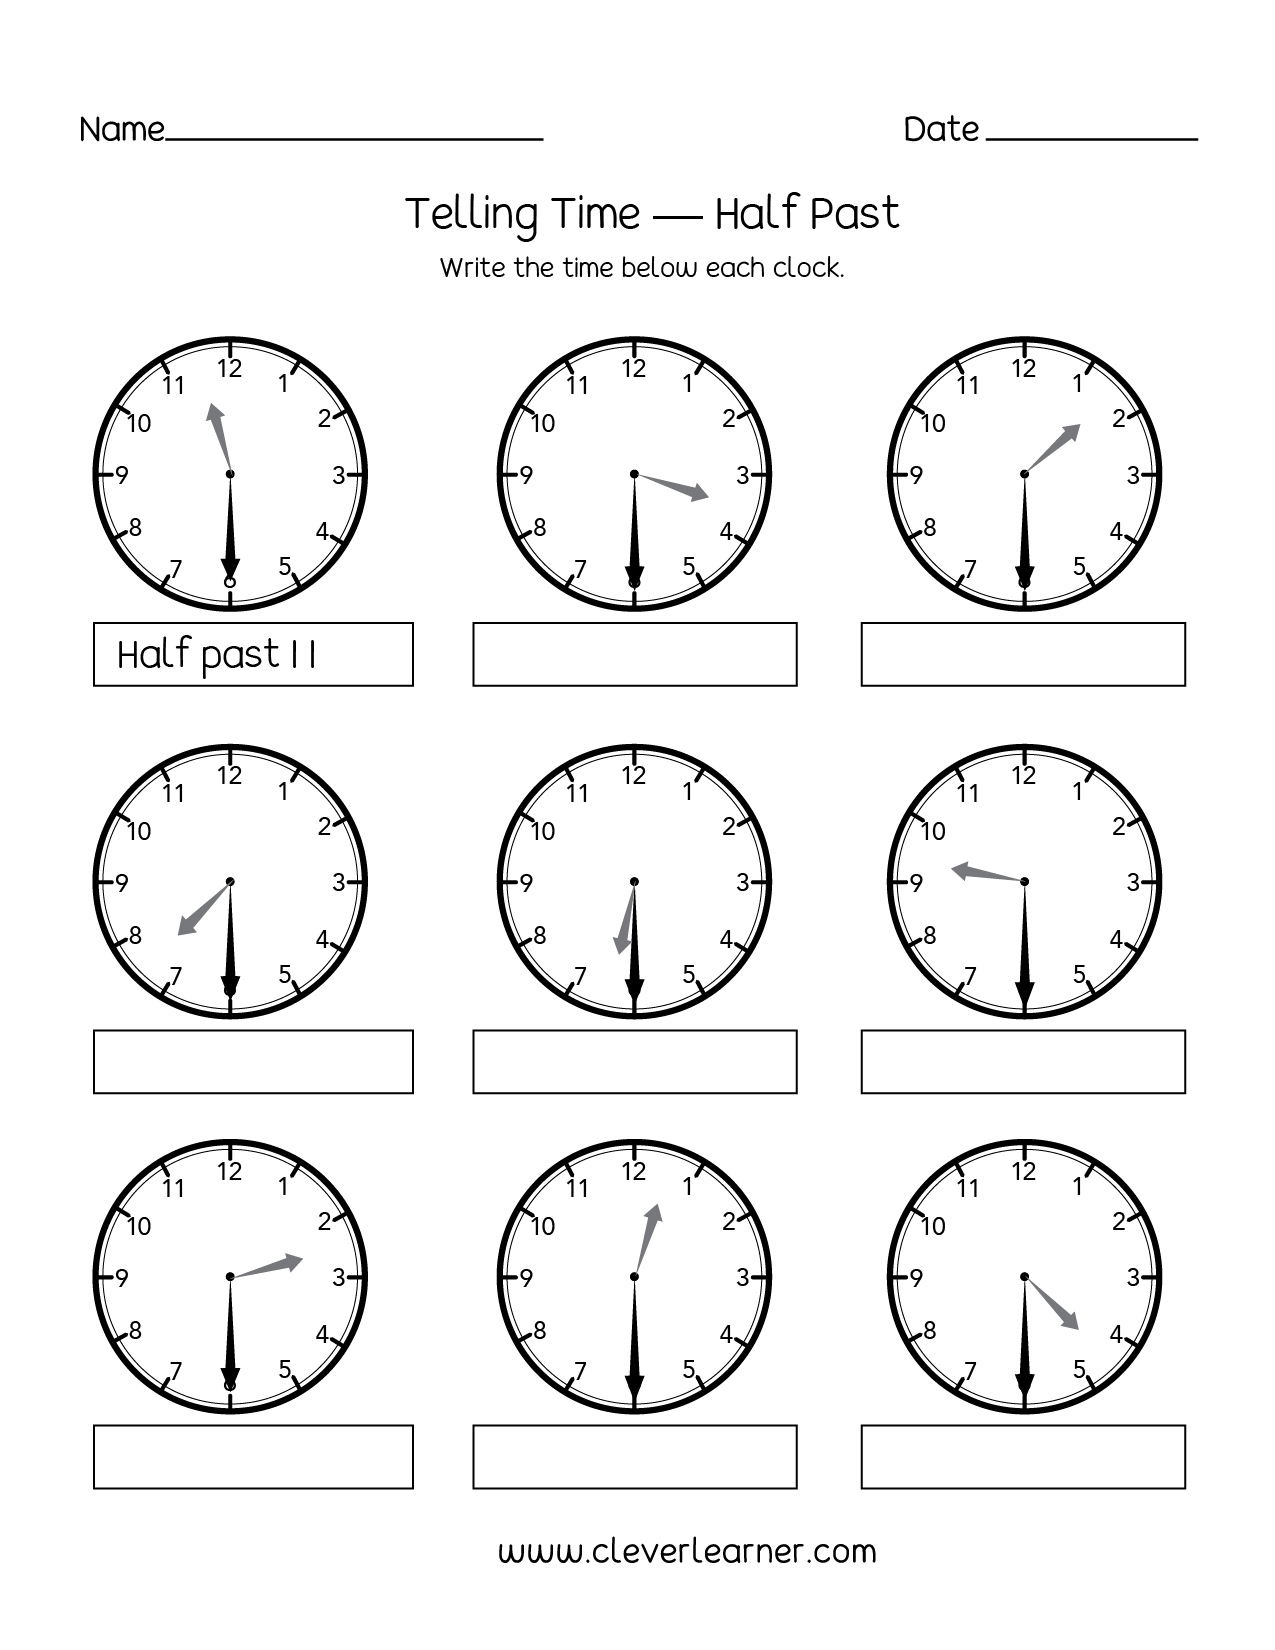 telling-time-half-past-the-hour-printable-multiplication-worksheets